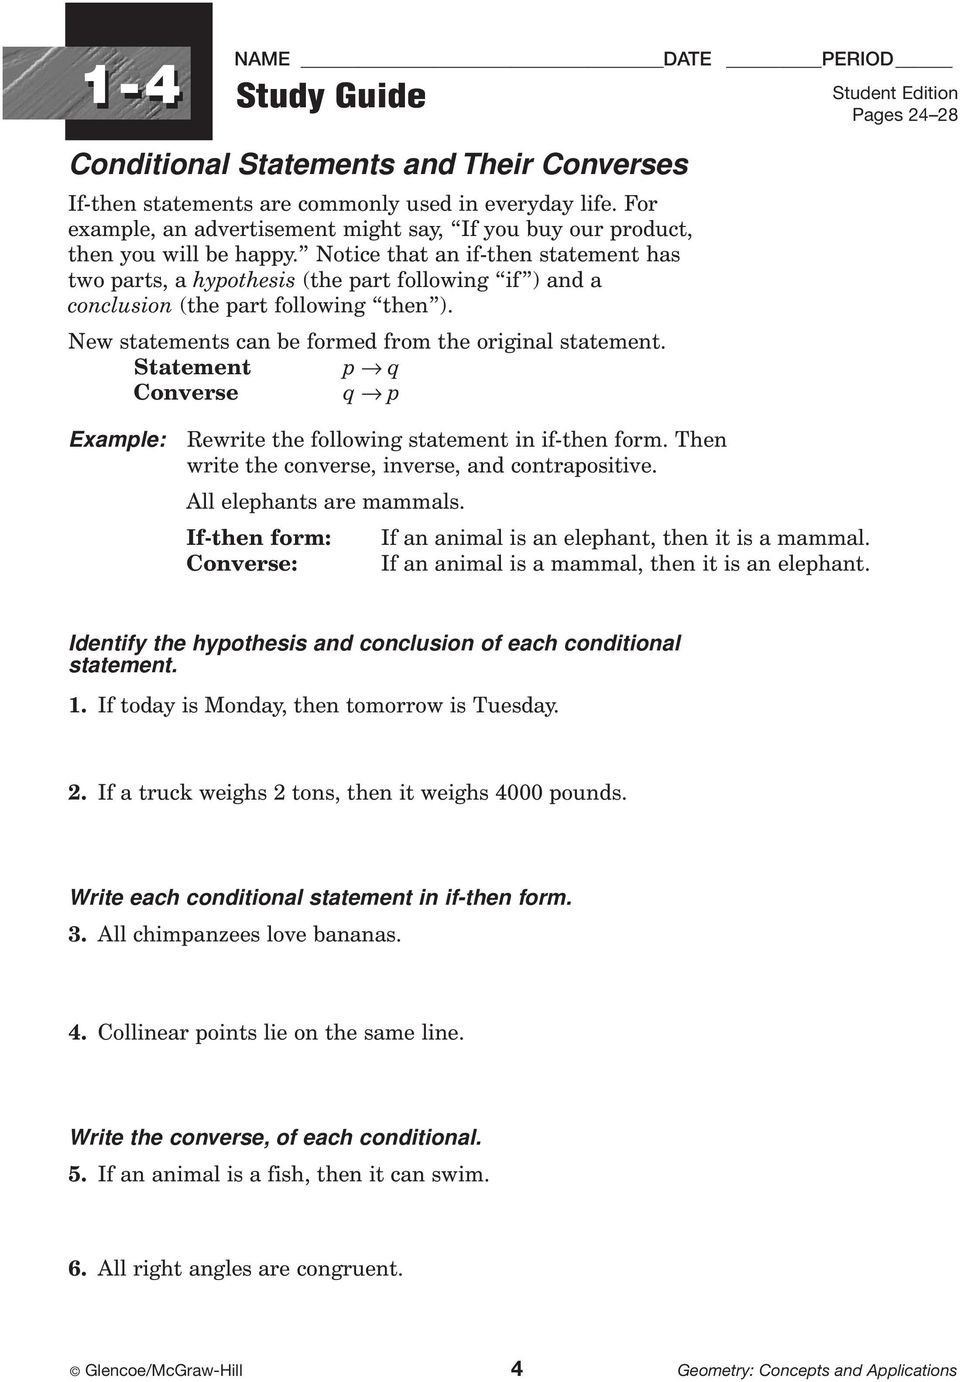 Conditional Statements Worksheet with Answers Study Guide Workbook Contents Include 96 Worksheets One